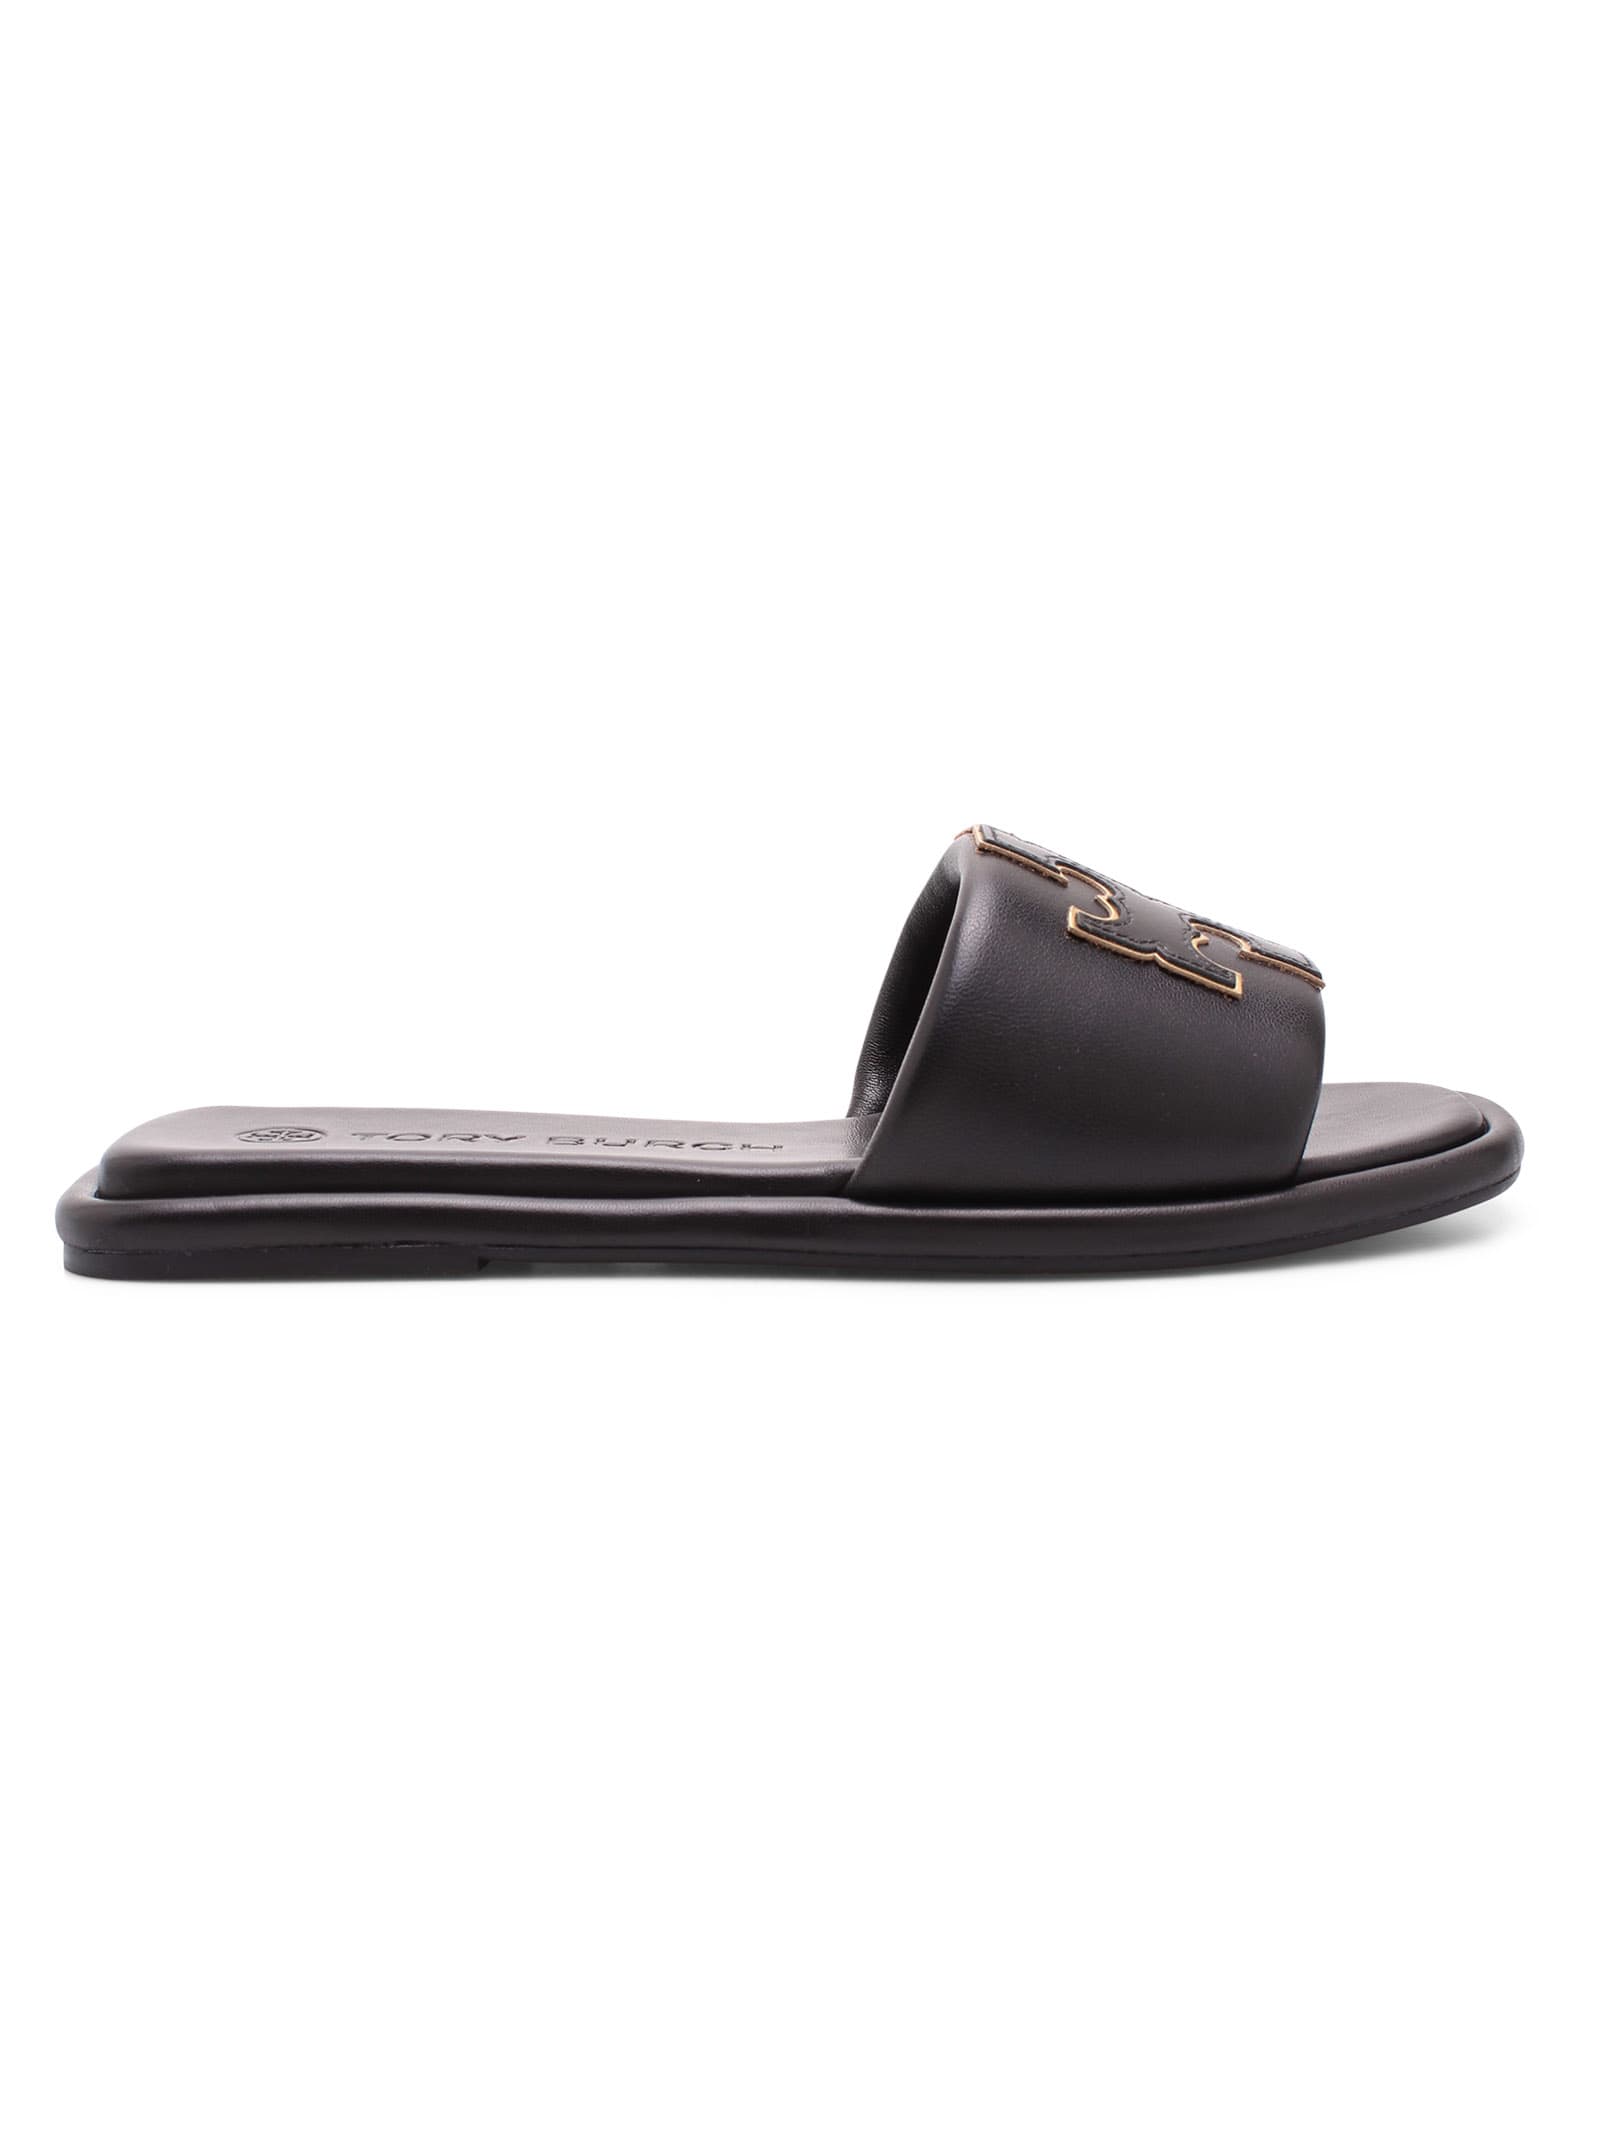 Tory Burch Double T Leather Flat Shoes In Black